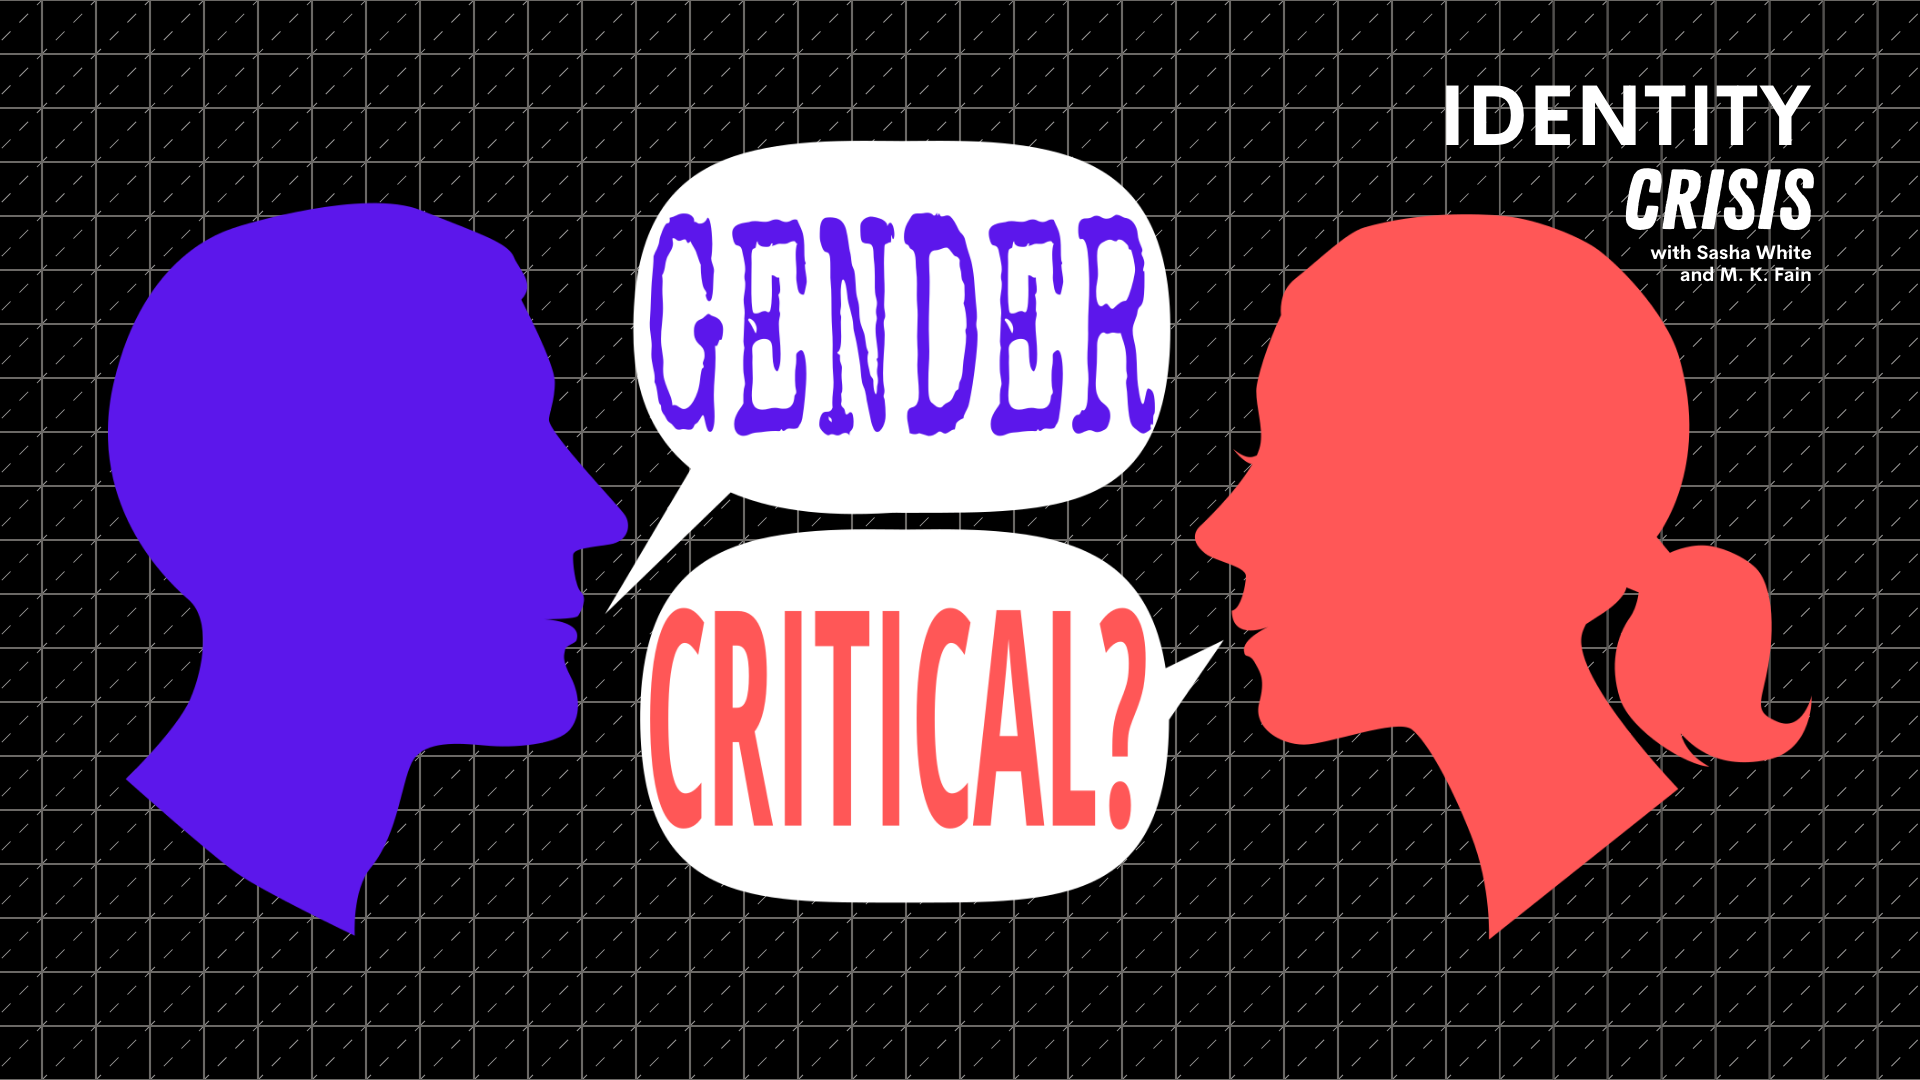 Identity Crisis: How Did You Become “Gender Critical”?